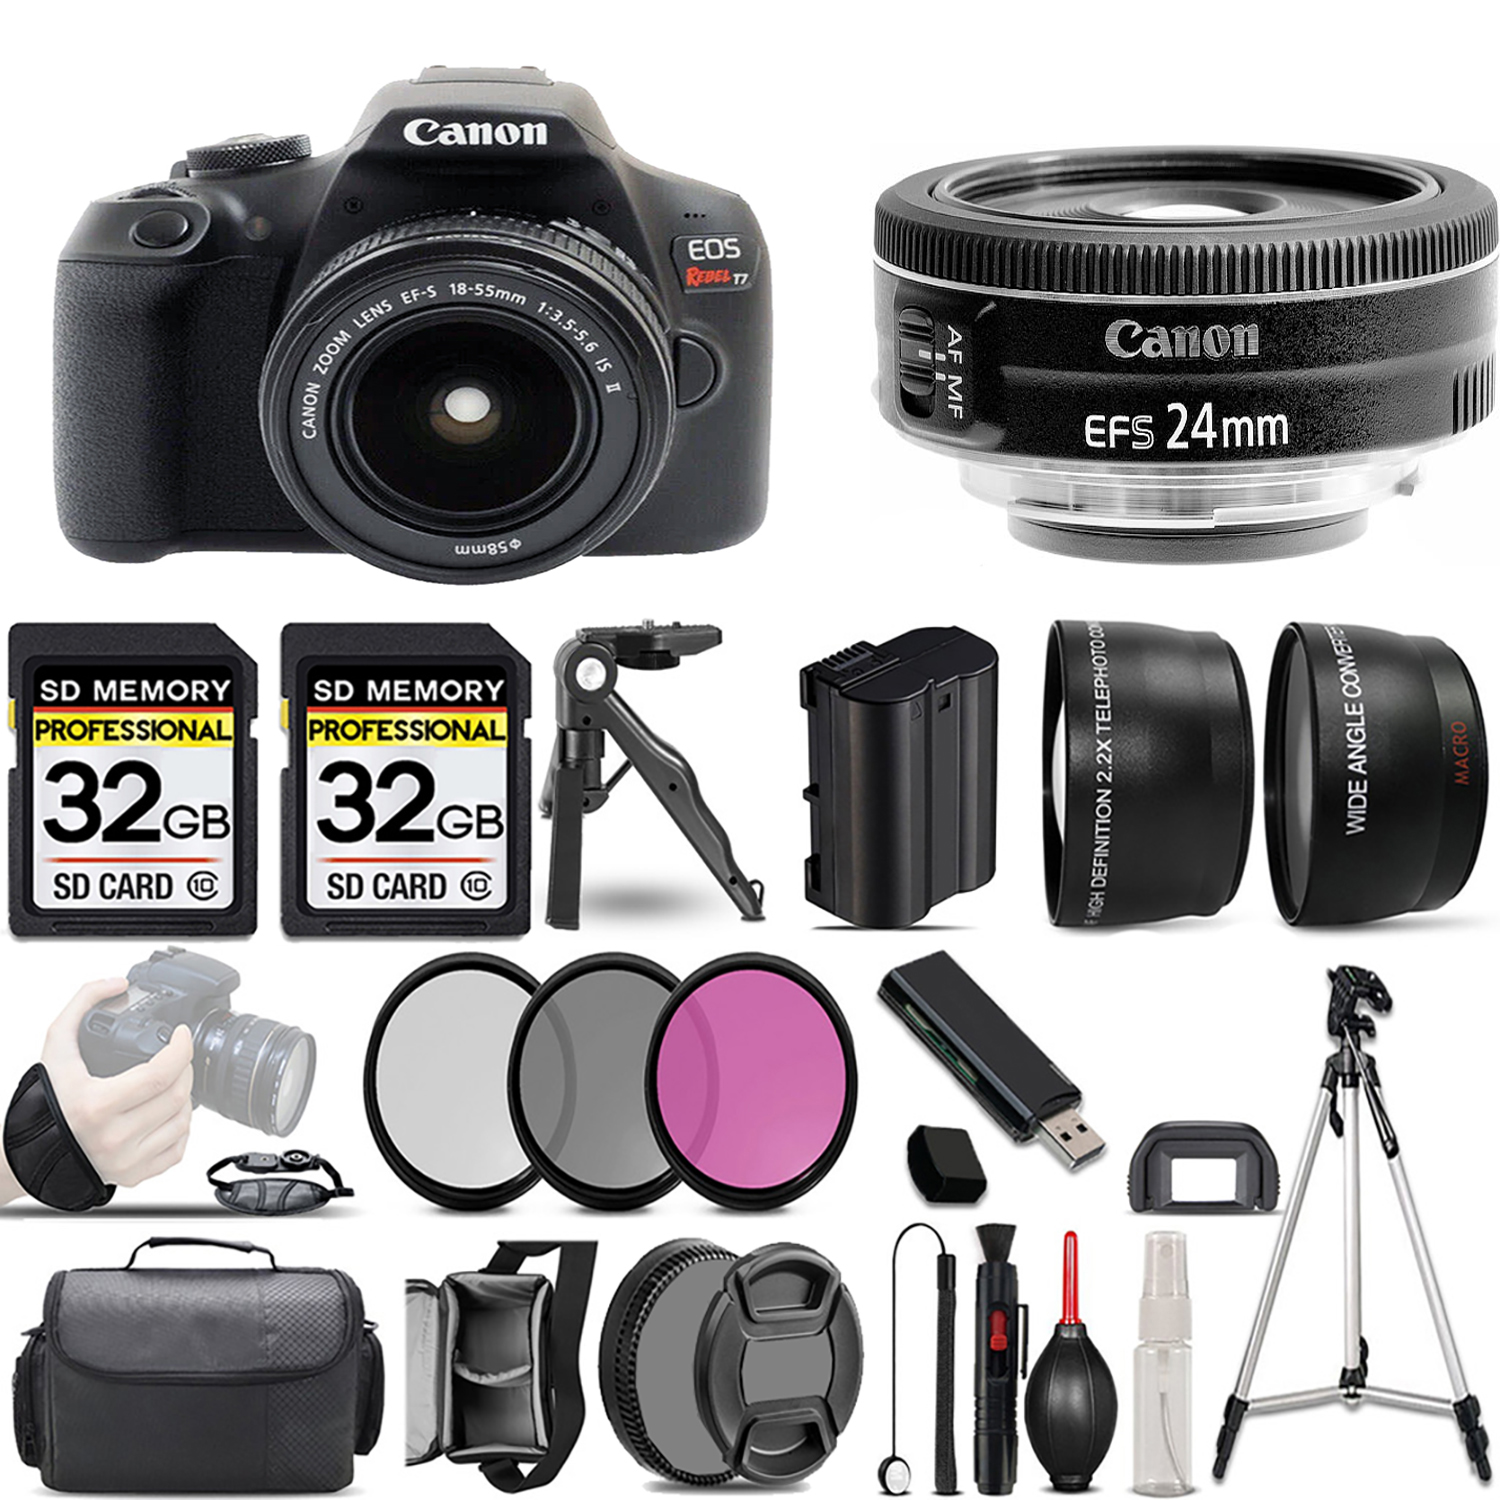 EOS Rebel T7 with 18-55mm Lens + 24mm f/2.8 STM Lens + 3 Piece Filter Set + 64GB *FREE SHIPPING*